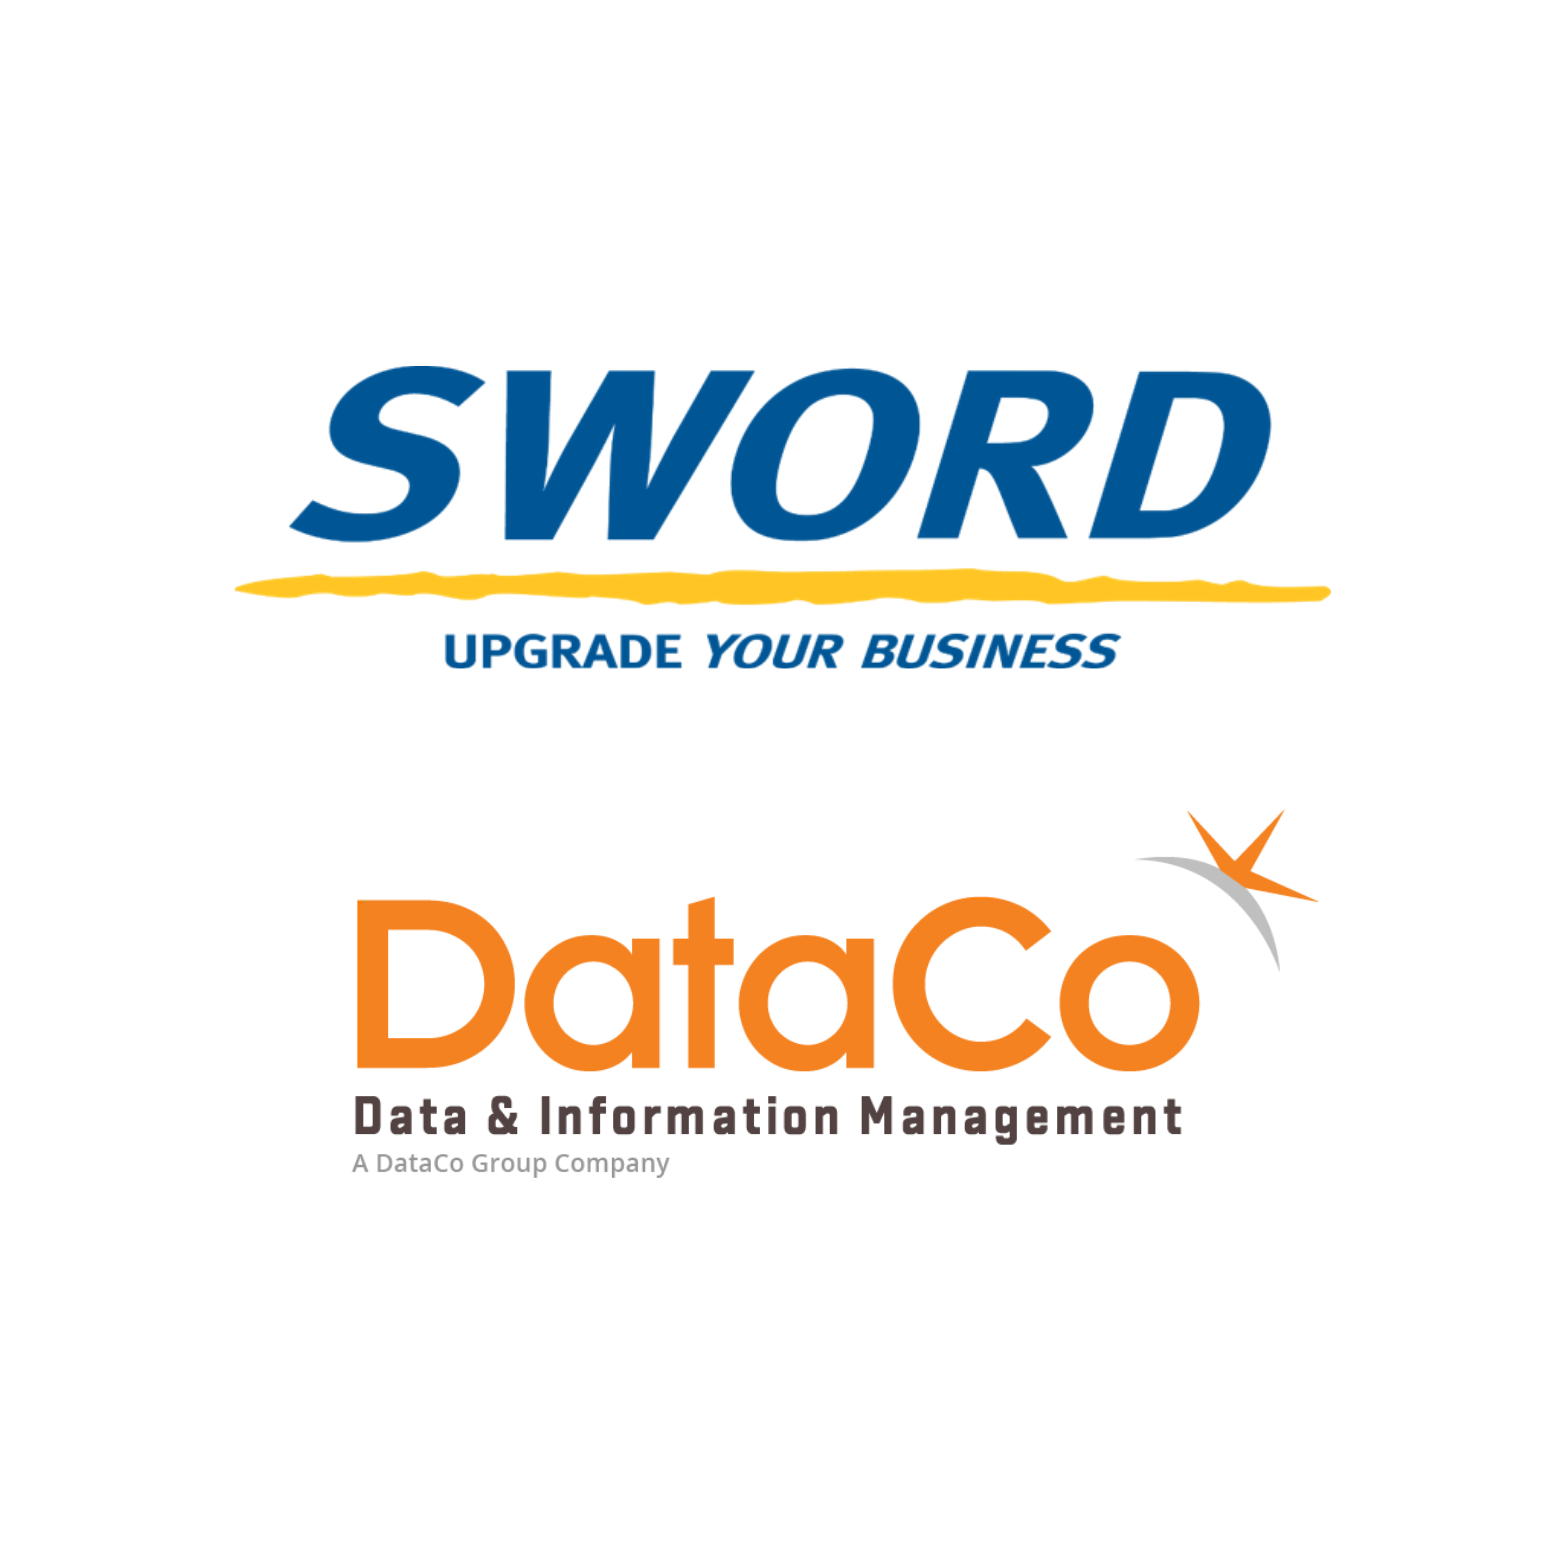 DataCo Ltd has been acquired by Sword Group, effective 5  th of November, 2019.